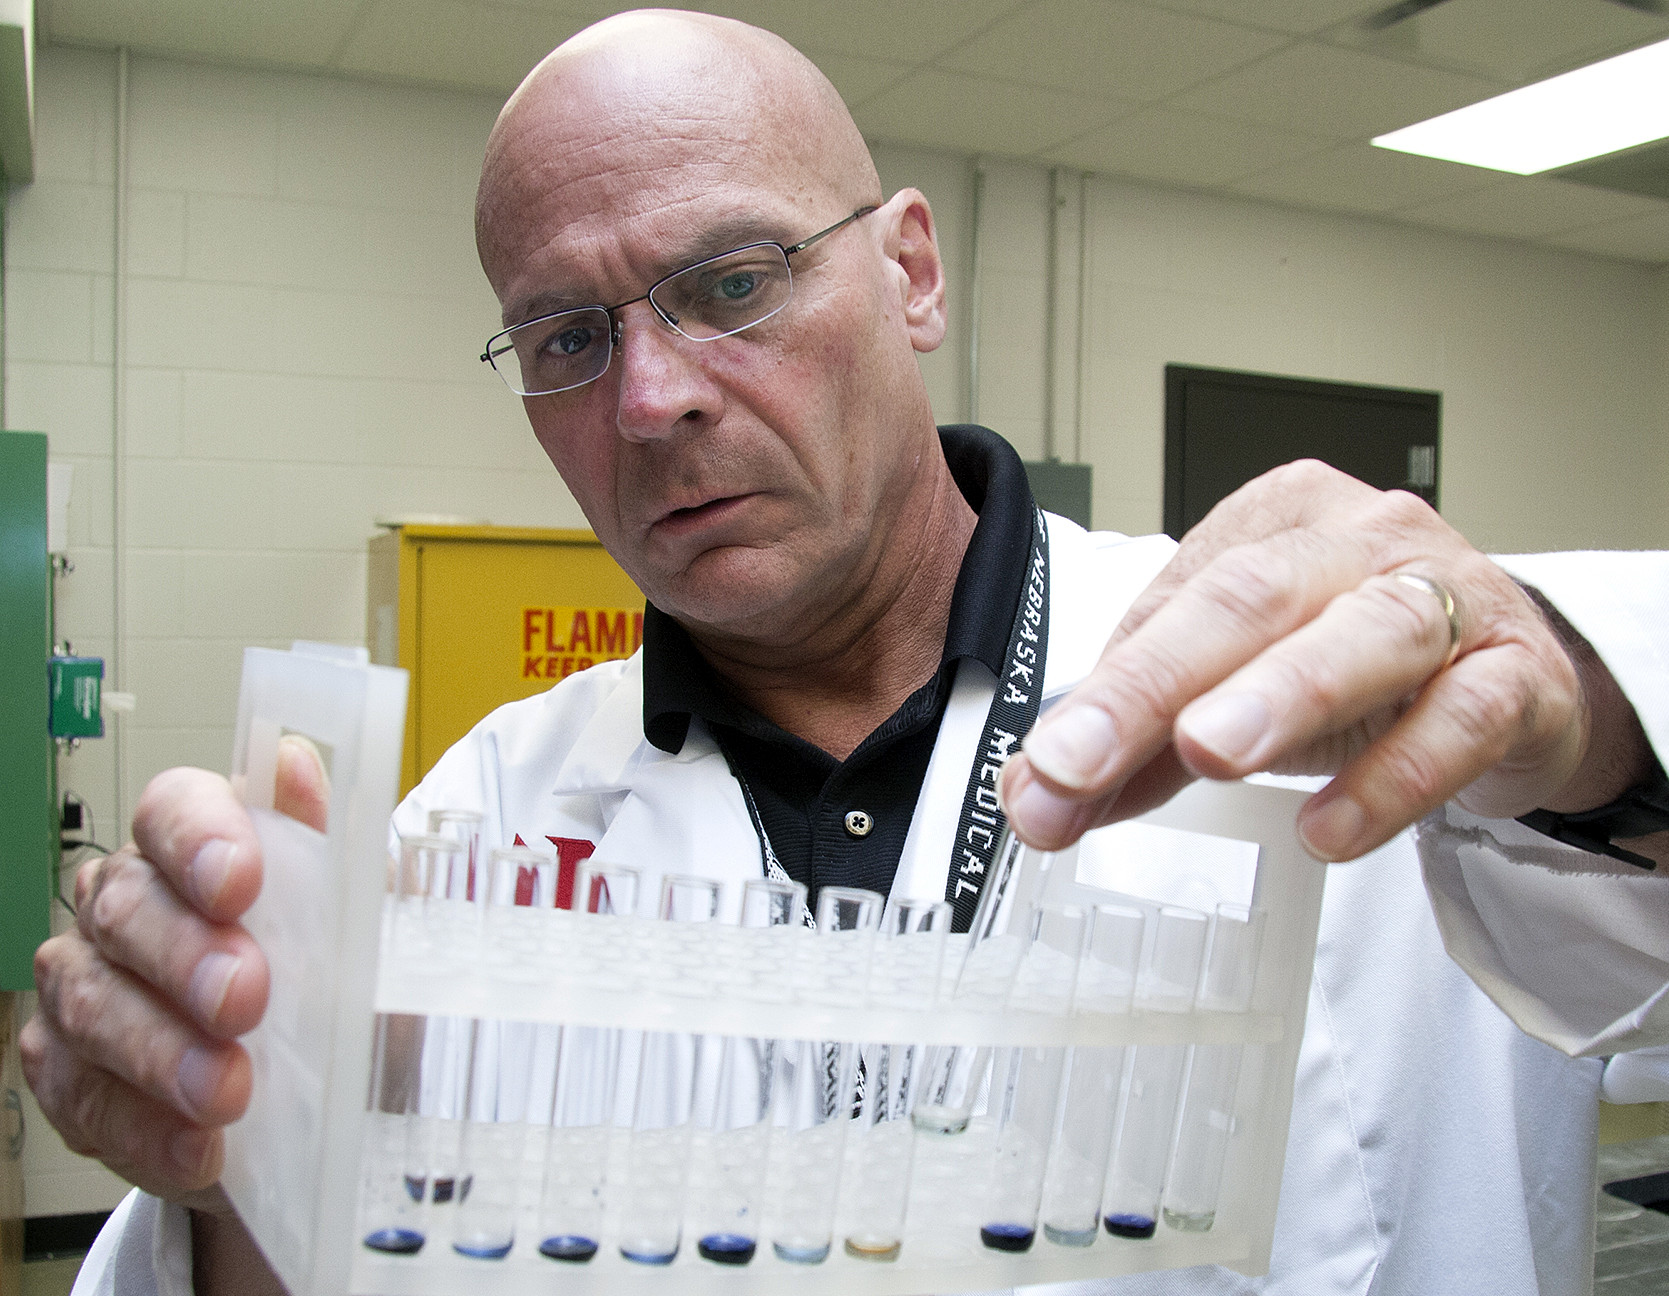 UNMC researcher Sam Sanderson, Ph.D., checks the results of a recent quality control test at his Omaha lab. His startup company, Prommune, has scheduled a test for a new H1N1 vaccine on pigs in Aug. 2015.